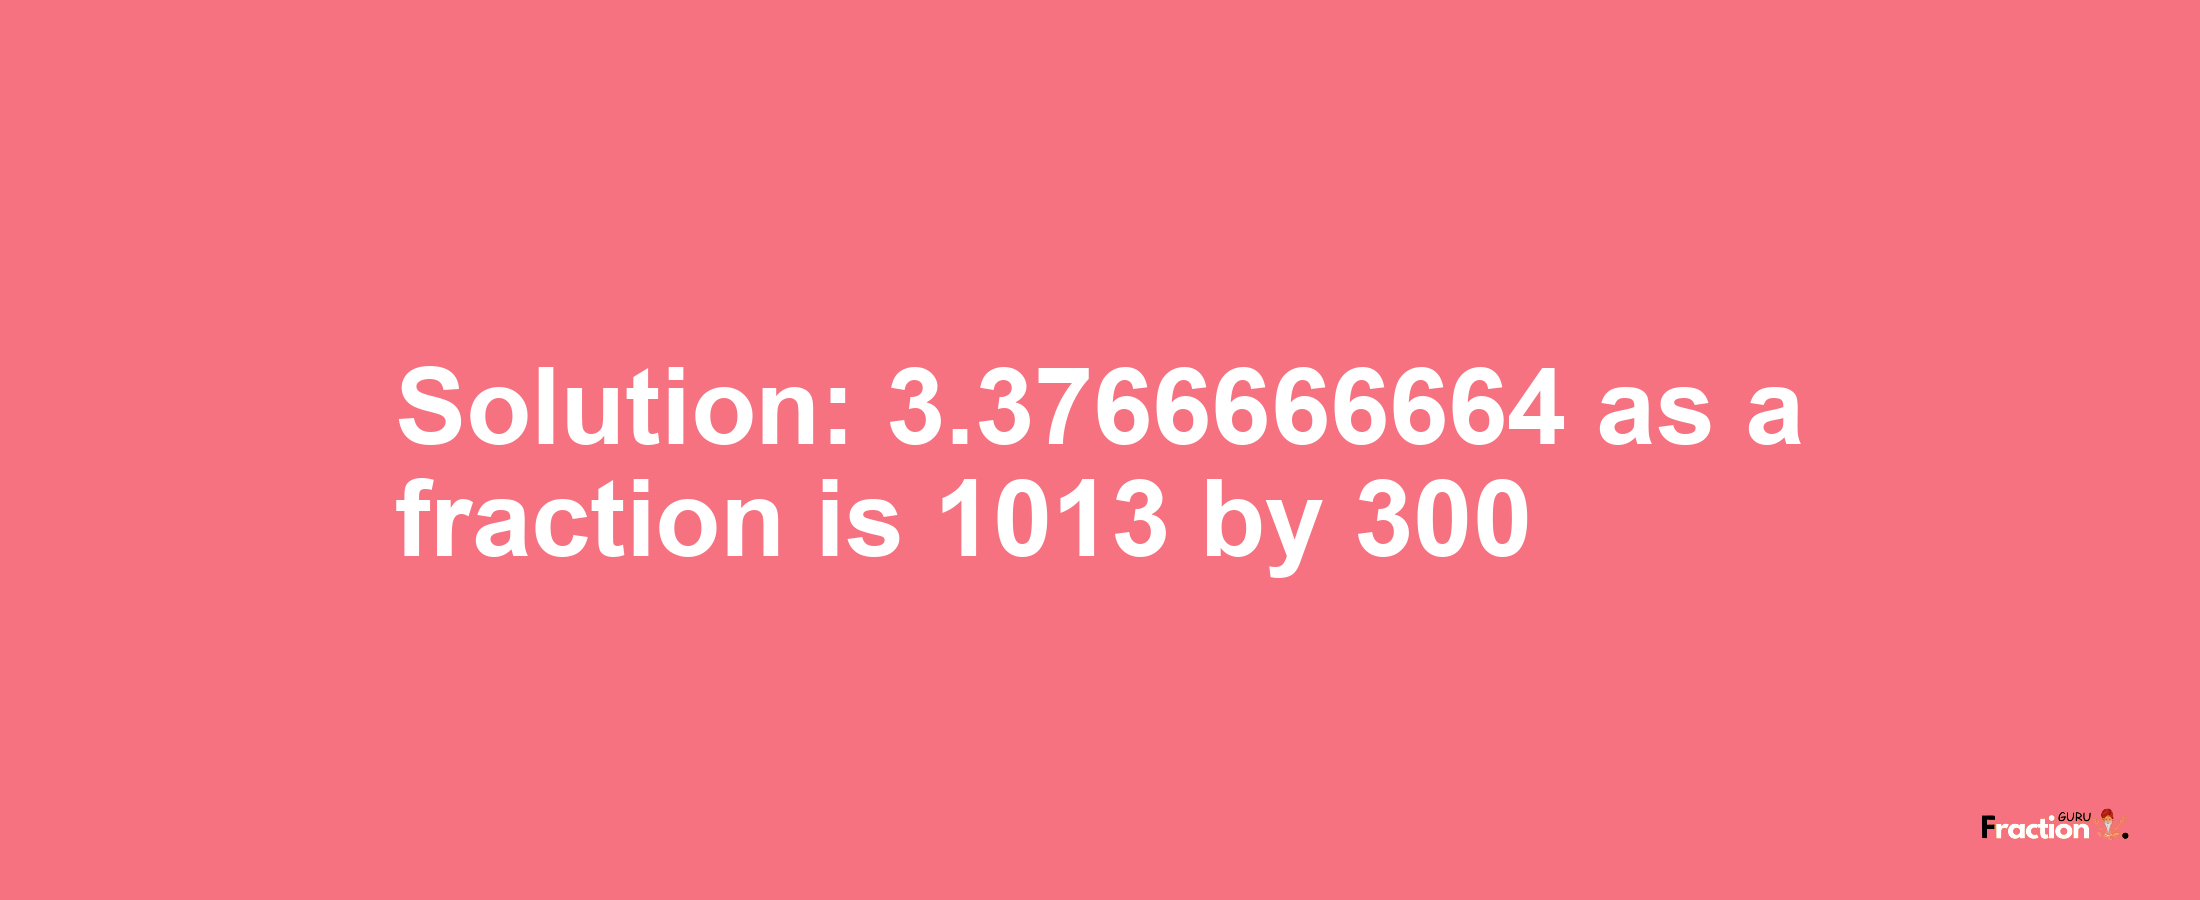 Solution:3.3766666664 as a fraction is 1013/300